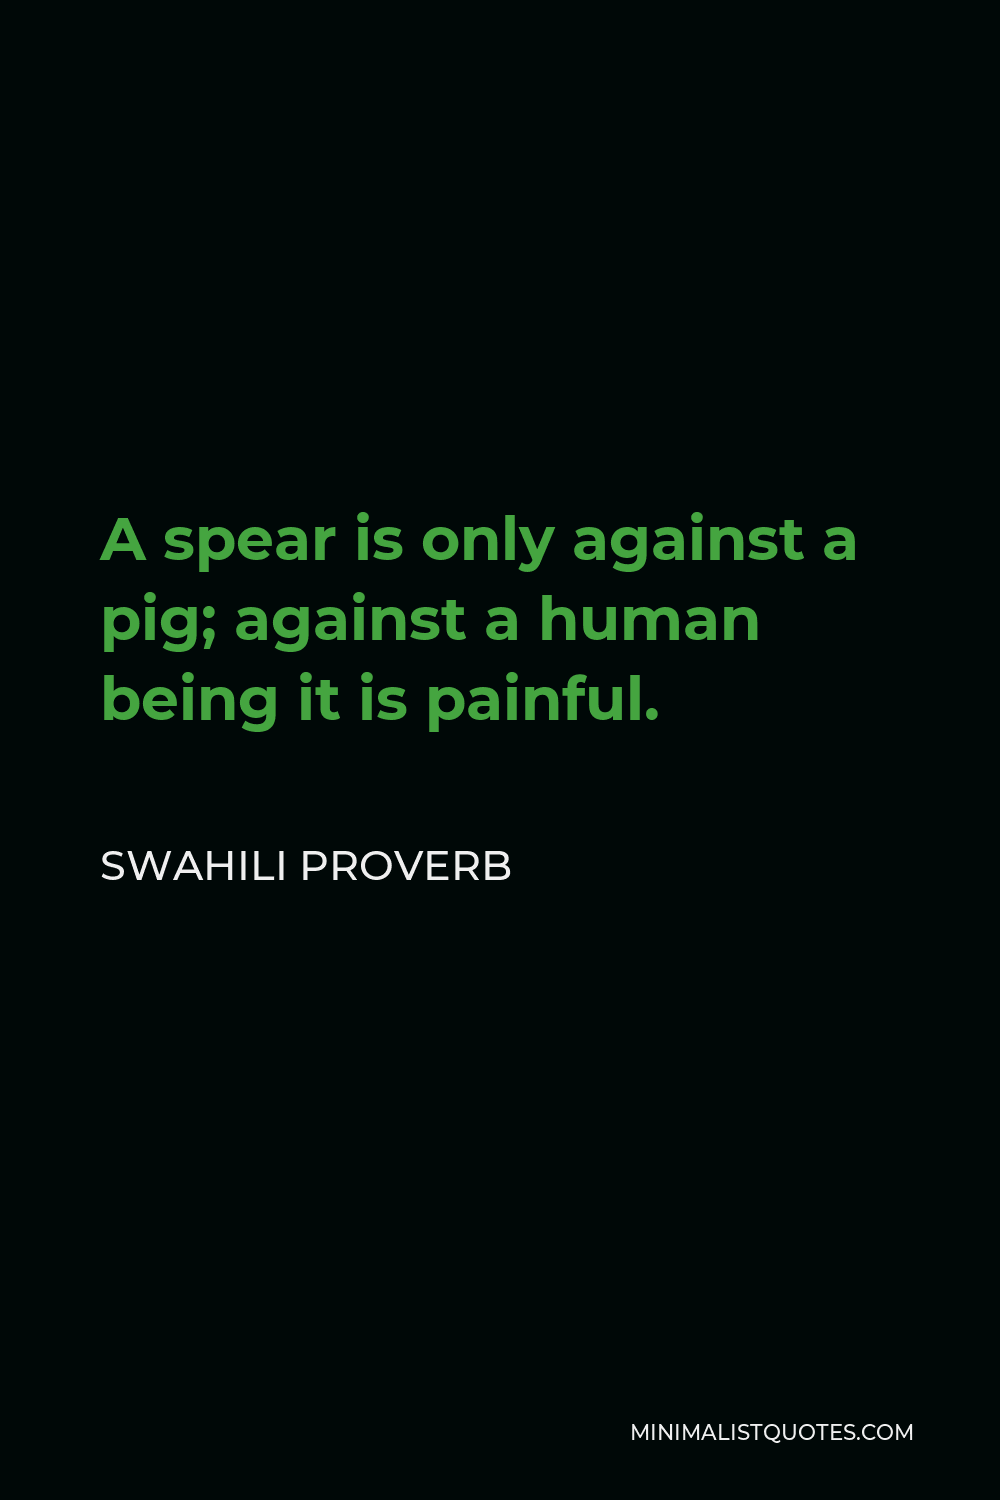 Swahili Proverb Quote - A spear is only against a pig; against a human being it is painful.